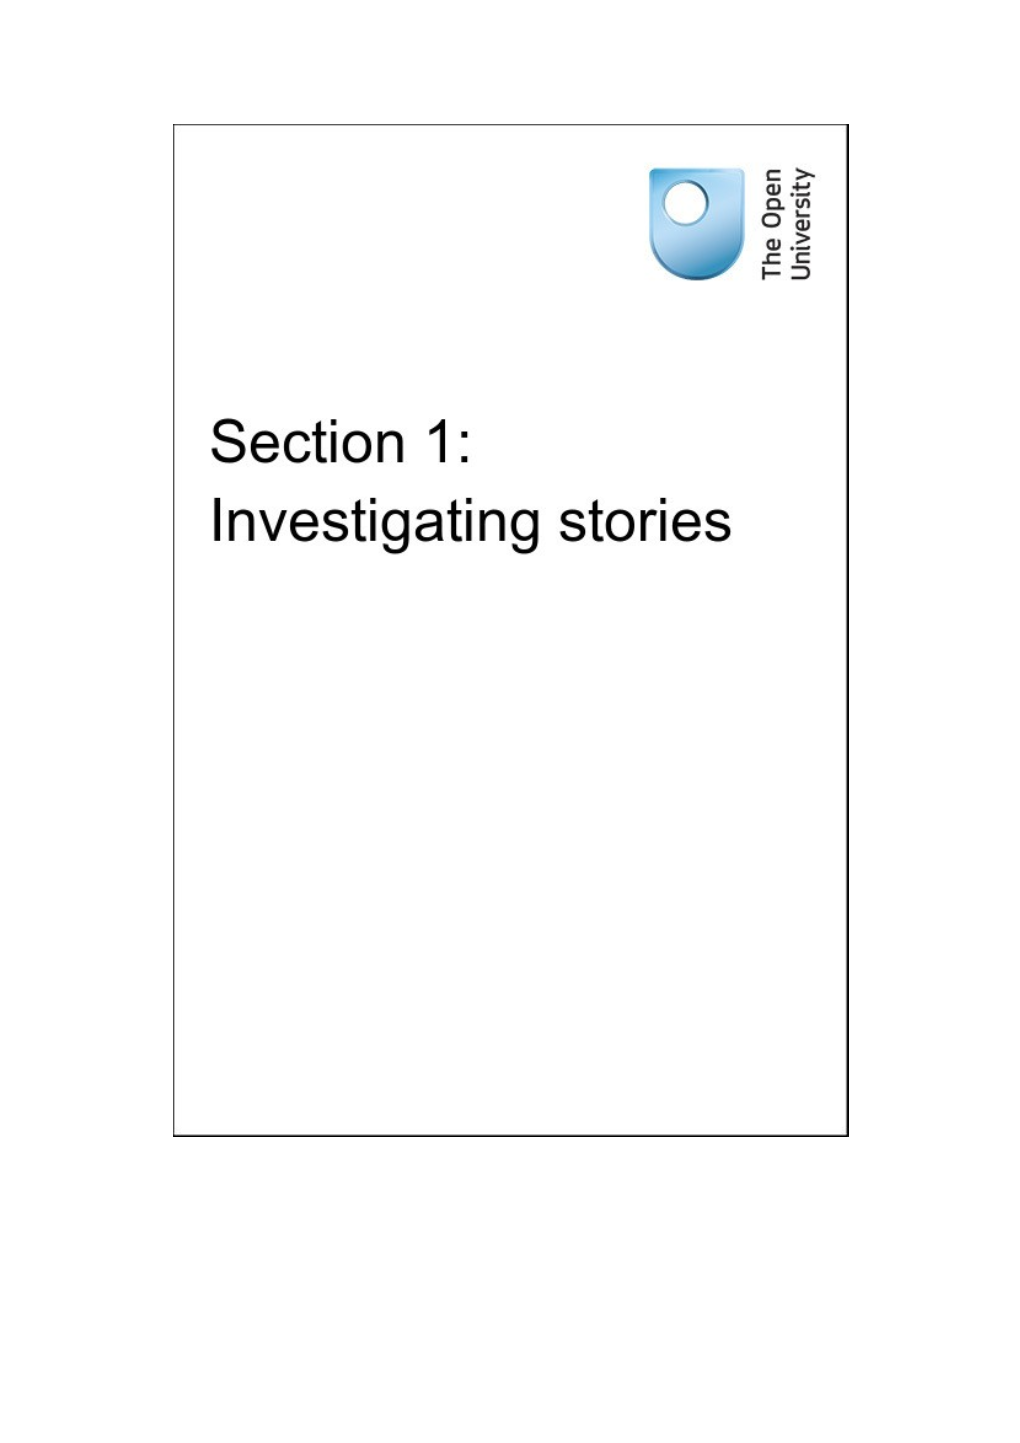 Section 1: Investigating Stories